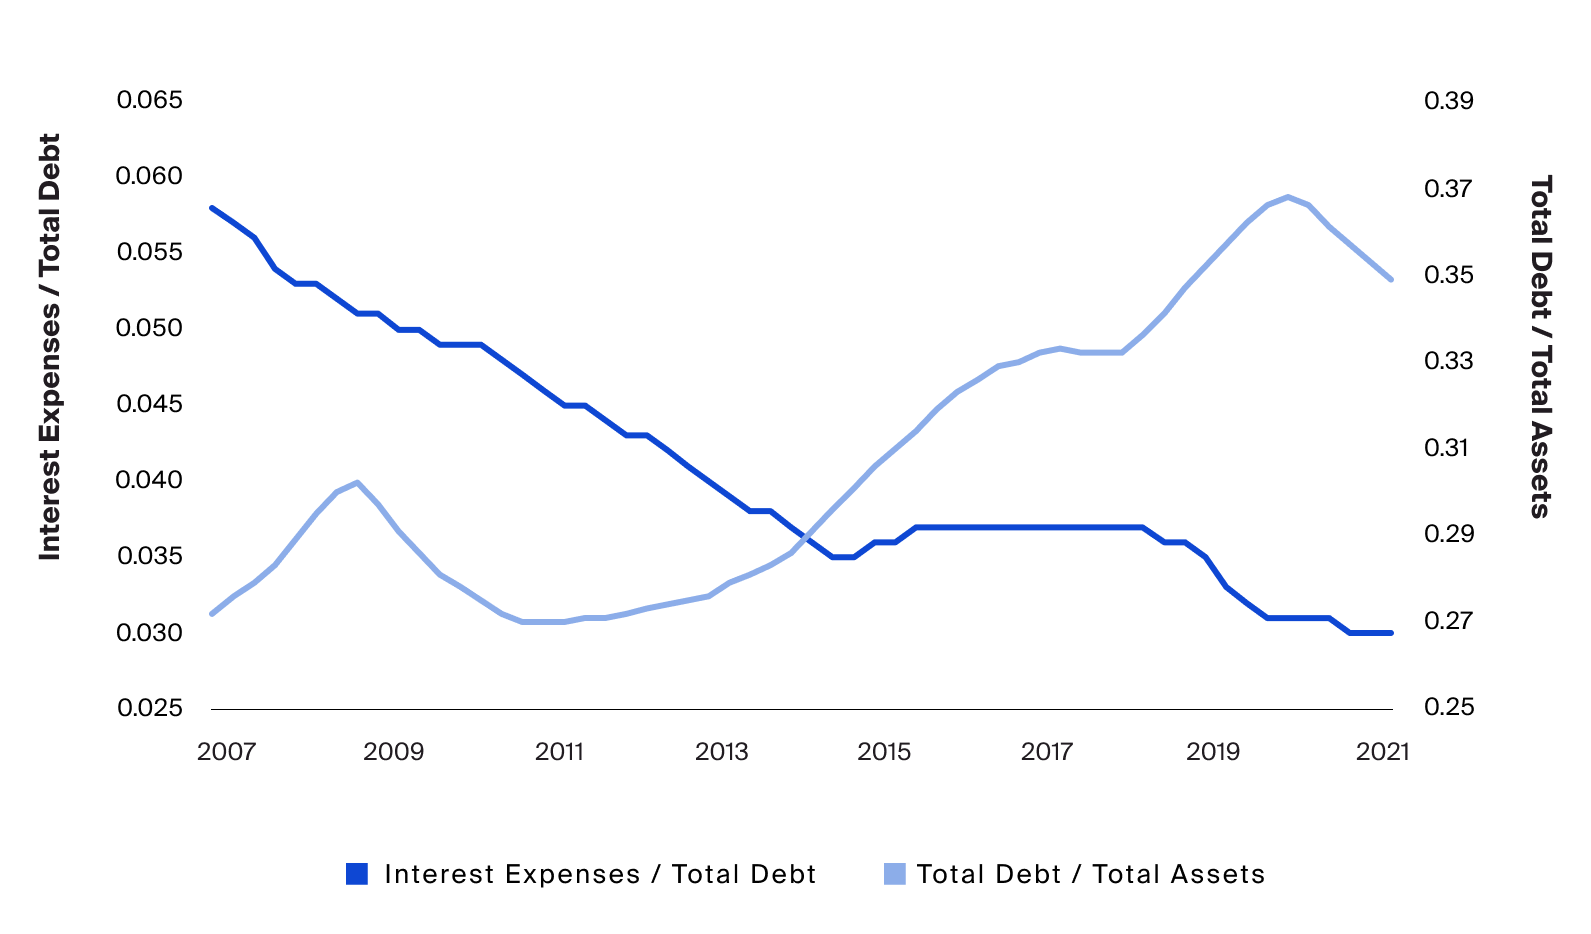 Corporations increased leverage as the cost of debt steadily decreased post-GFC, which may lead to potentially unsustainable capital structures